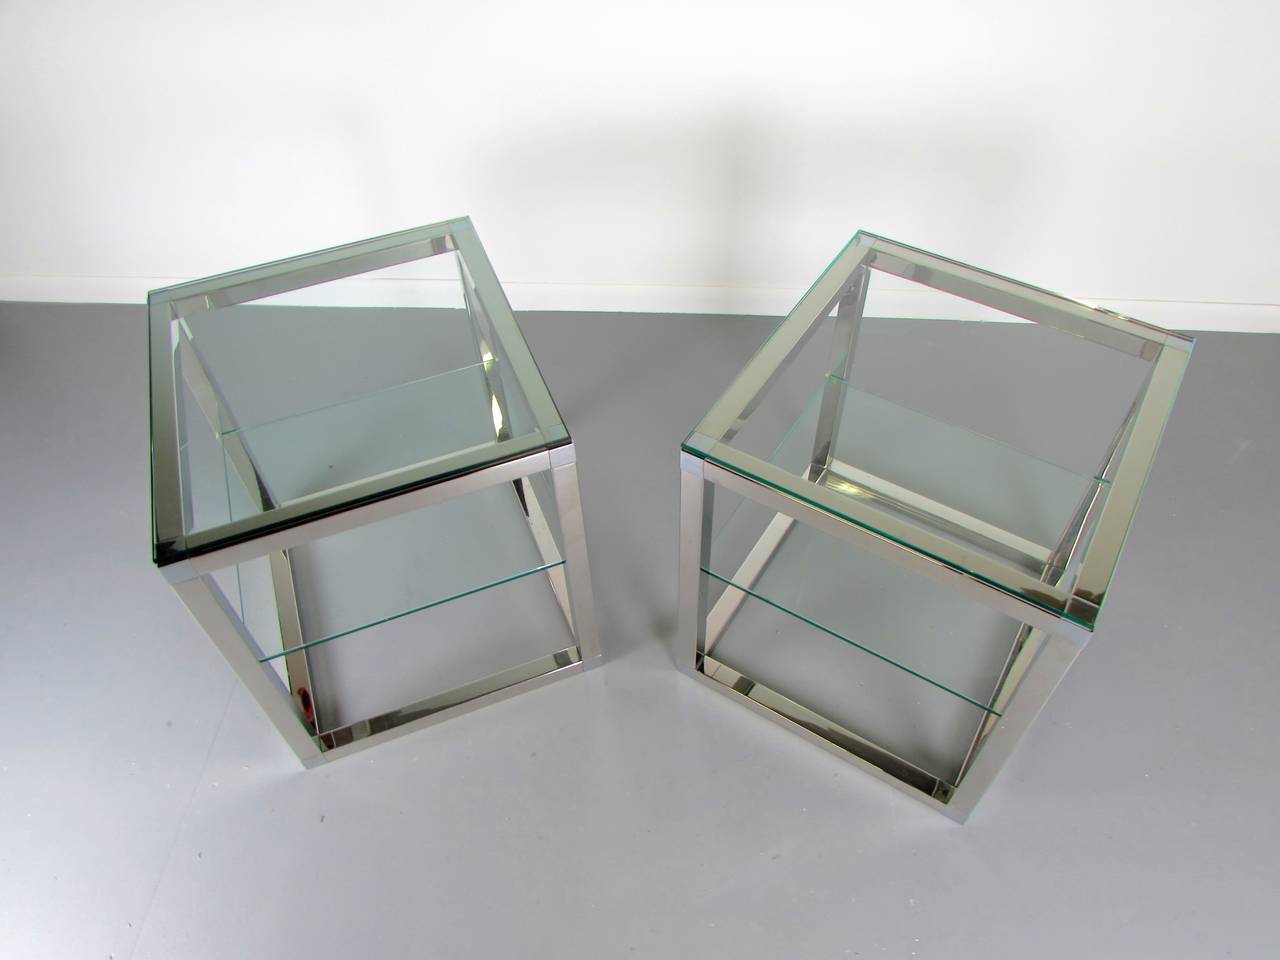 Late 20th Century Minimalist Chrome Cube Tables with Glass Shelves in the Style of Milo Baughman